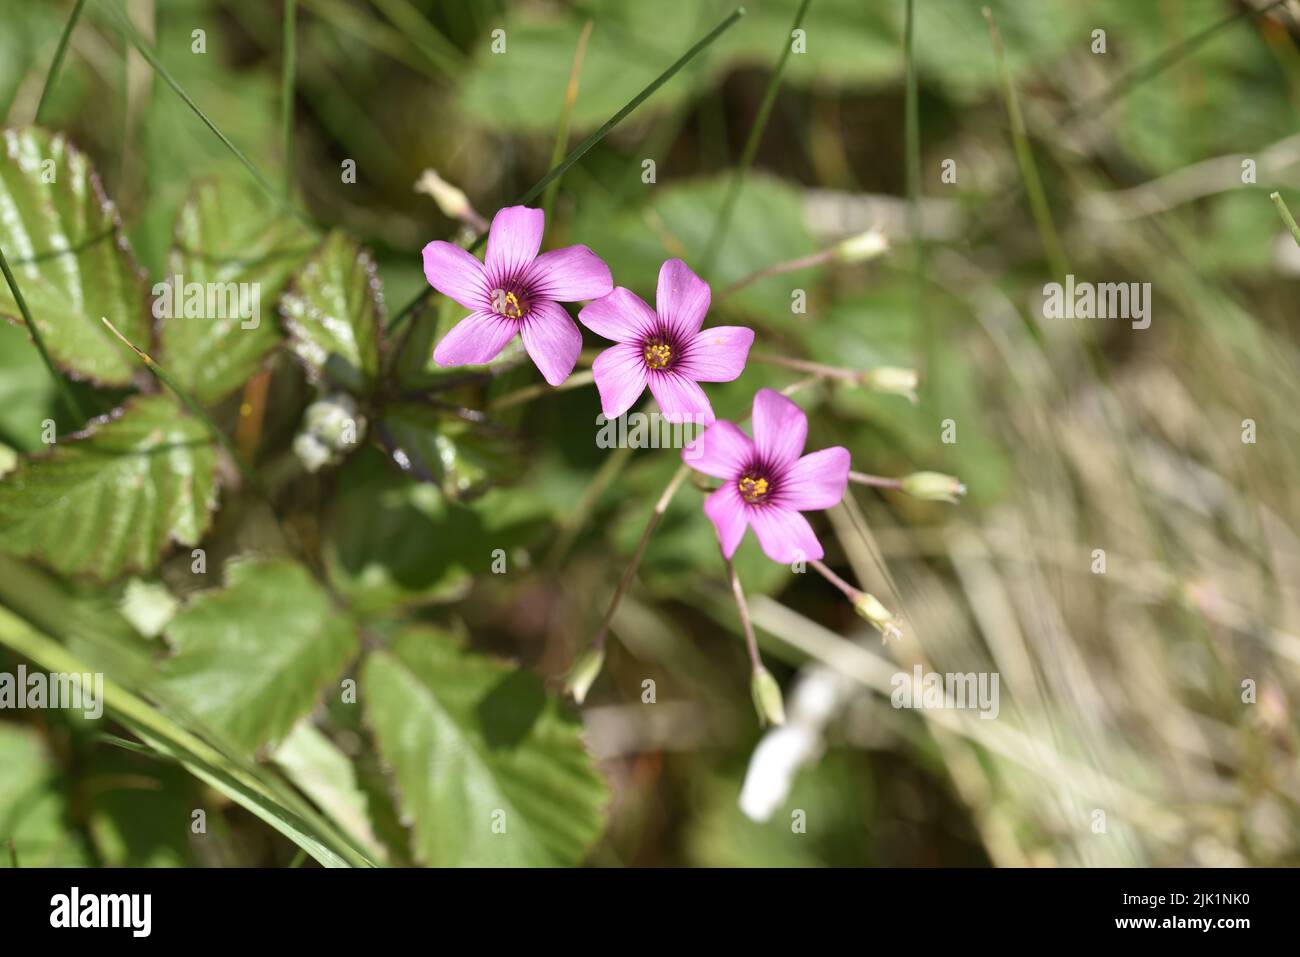 Trio of Three Pink-sorrel (Oxalis articulata) Flowers in a Diagonal Row, Against a Sunlit Green Foliage Background, Taken in June in the UK Stock Photo